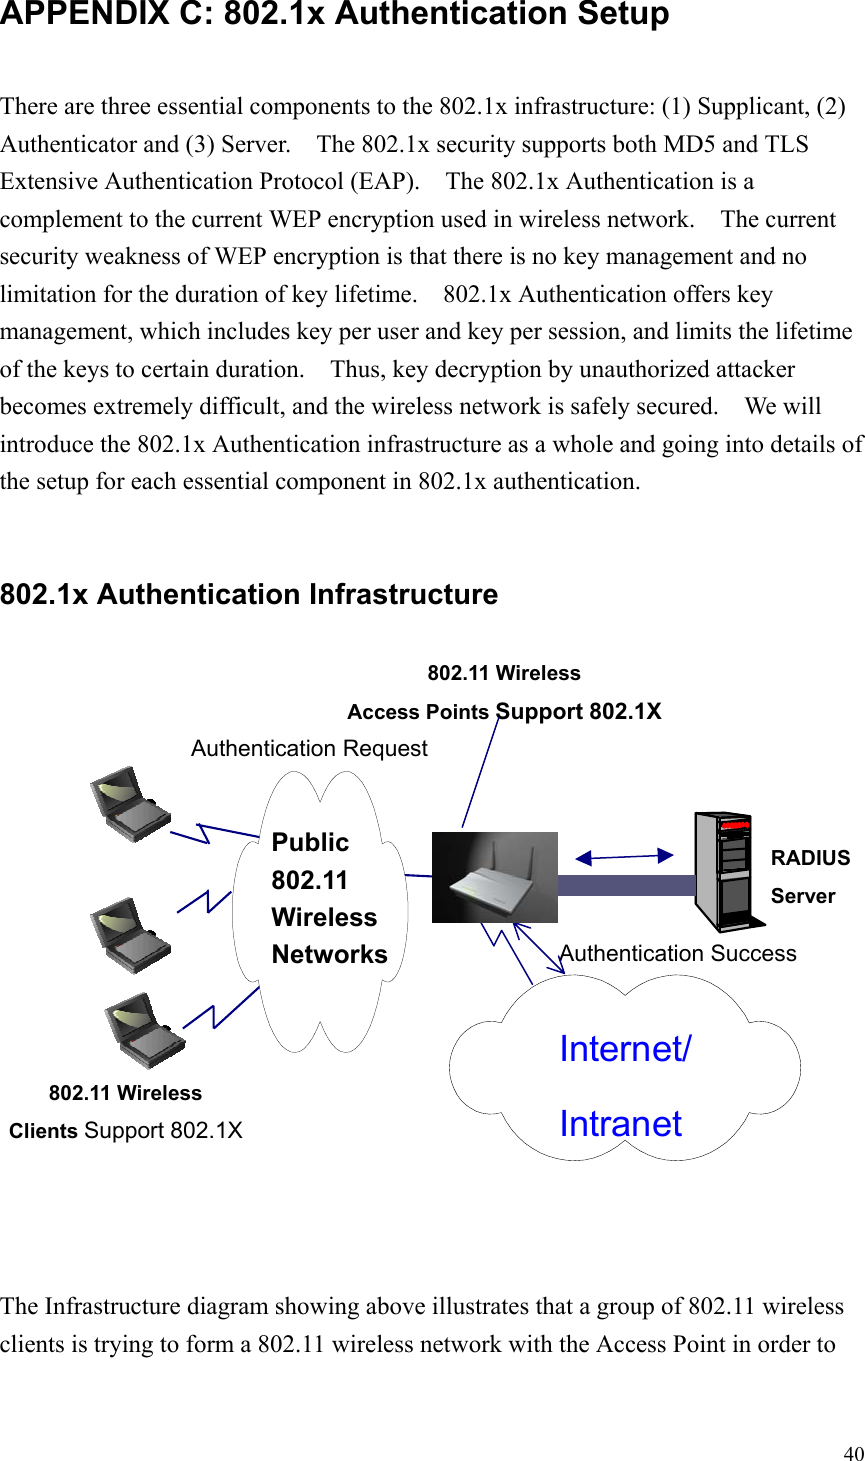 40APPENDIX C: 802.1x Authentication SetupThere are three essential components to the 802.1x infrastructure: (1) Supplicant, (2)Authenticator and (3) Server.    The 802.1x security supports both MD5 and TLSExtensive Authentication Protocol (EAP).    The 802.1x Authentication is acomplement to the current WEP encryption used in wireless network.    The currentsecurity weakness of WEP encryption is that there is no key management and nolimitation for the duration of key lifetime.    802.1x Authentication offers keymanagement, which includes key per user and key per session, and limits the lifetimeof the keys to certain duration.    Thus, key decryption by unauthorized attackerbecomes extremely difficult, and the wireless network is safely secured.    We willintroduce the 802.1x Authentication infrastructure as a whole and going into details ofthe setup for each essential component in 802.1x authentication.802.1x Authentication InfrastructureThe Infrastructure diagram showing above illustrates that a group of 802.11 wirelessclients is trying to form a 802.11 wireless network with the Access Point in order to802.11 WirelessAccess Points Support 802.1XRADIUSServerAuthentication RequestInternet/IntranetAuthentication Success802.11 WirelessClients Support 802.1XPublic802.11WirelessNetworks